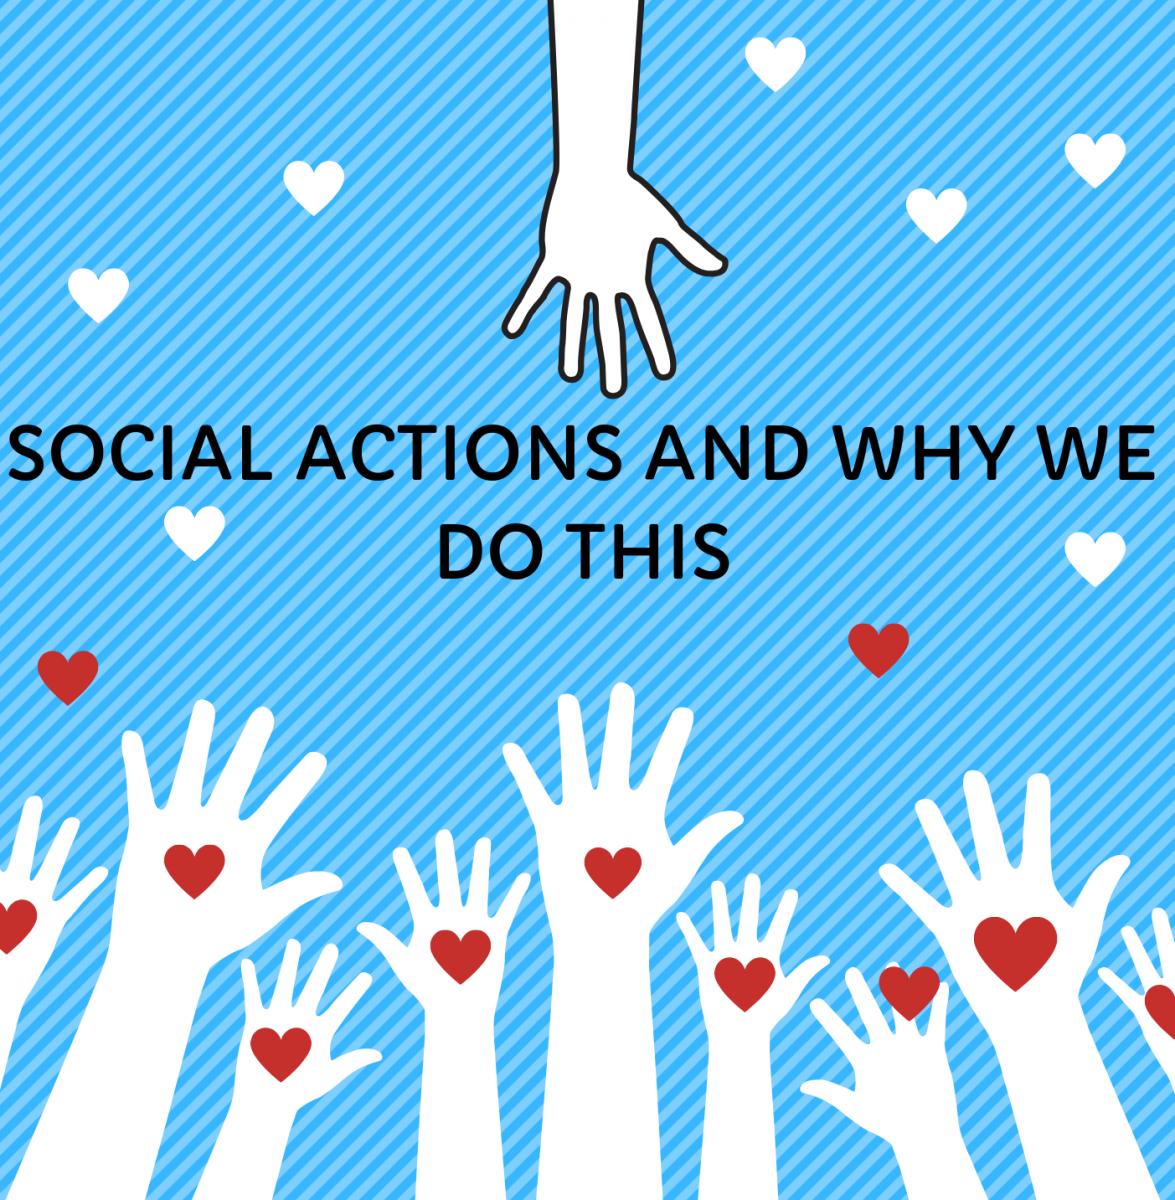 SOCIAL ACTIONS AND WHY WE DO THIS